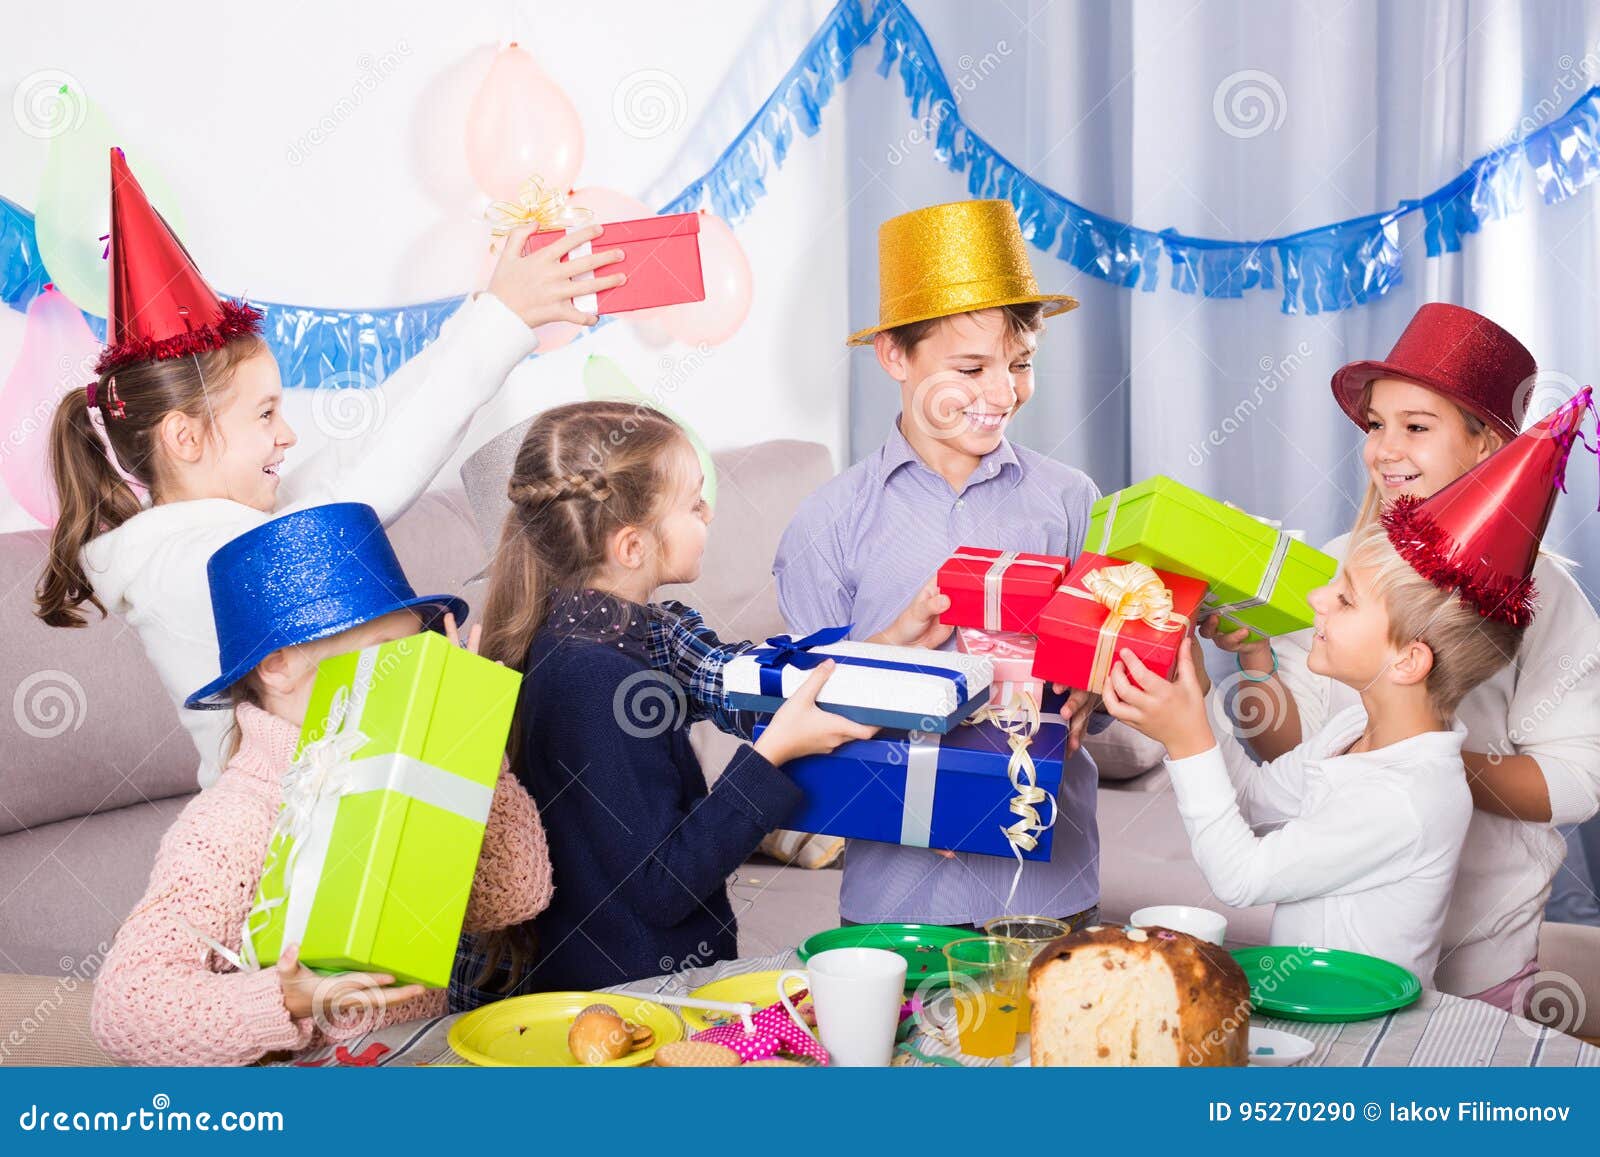 Children Giving Presents To Little Boy during Party Stock Photo - Image ...